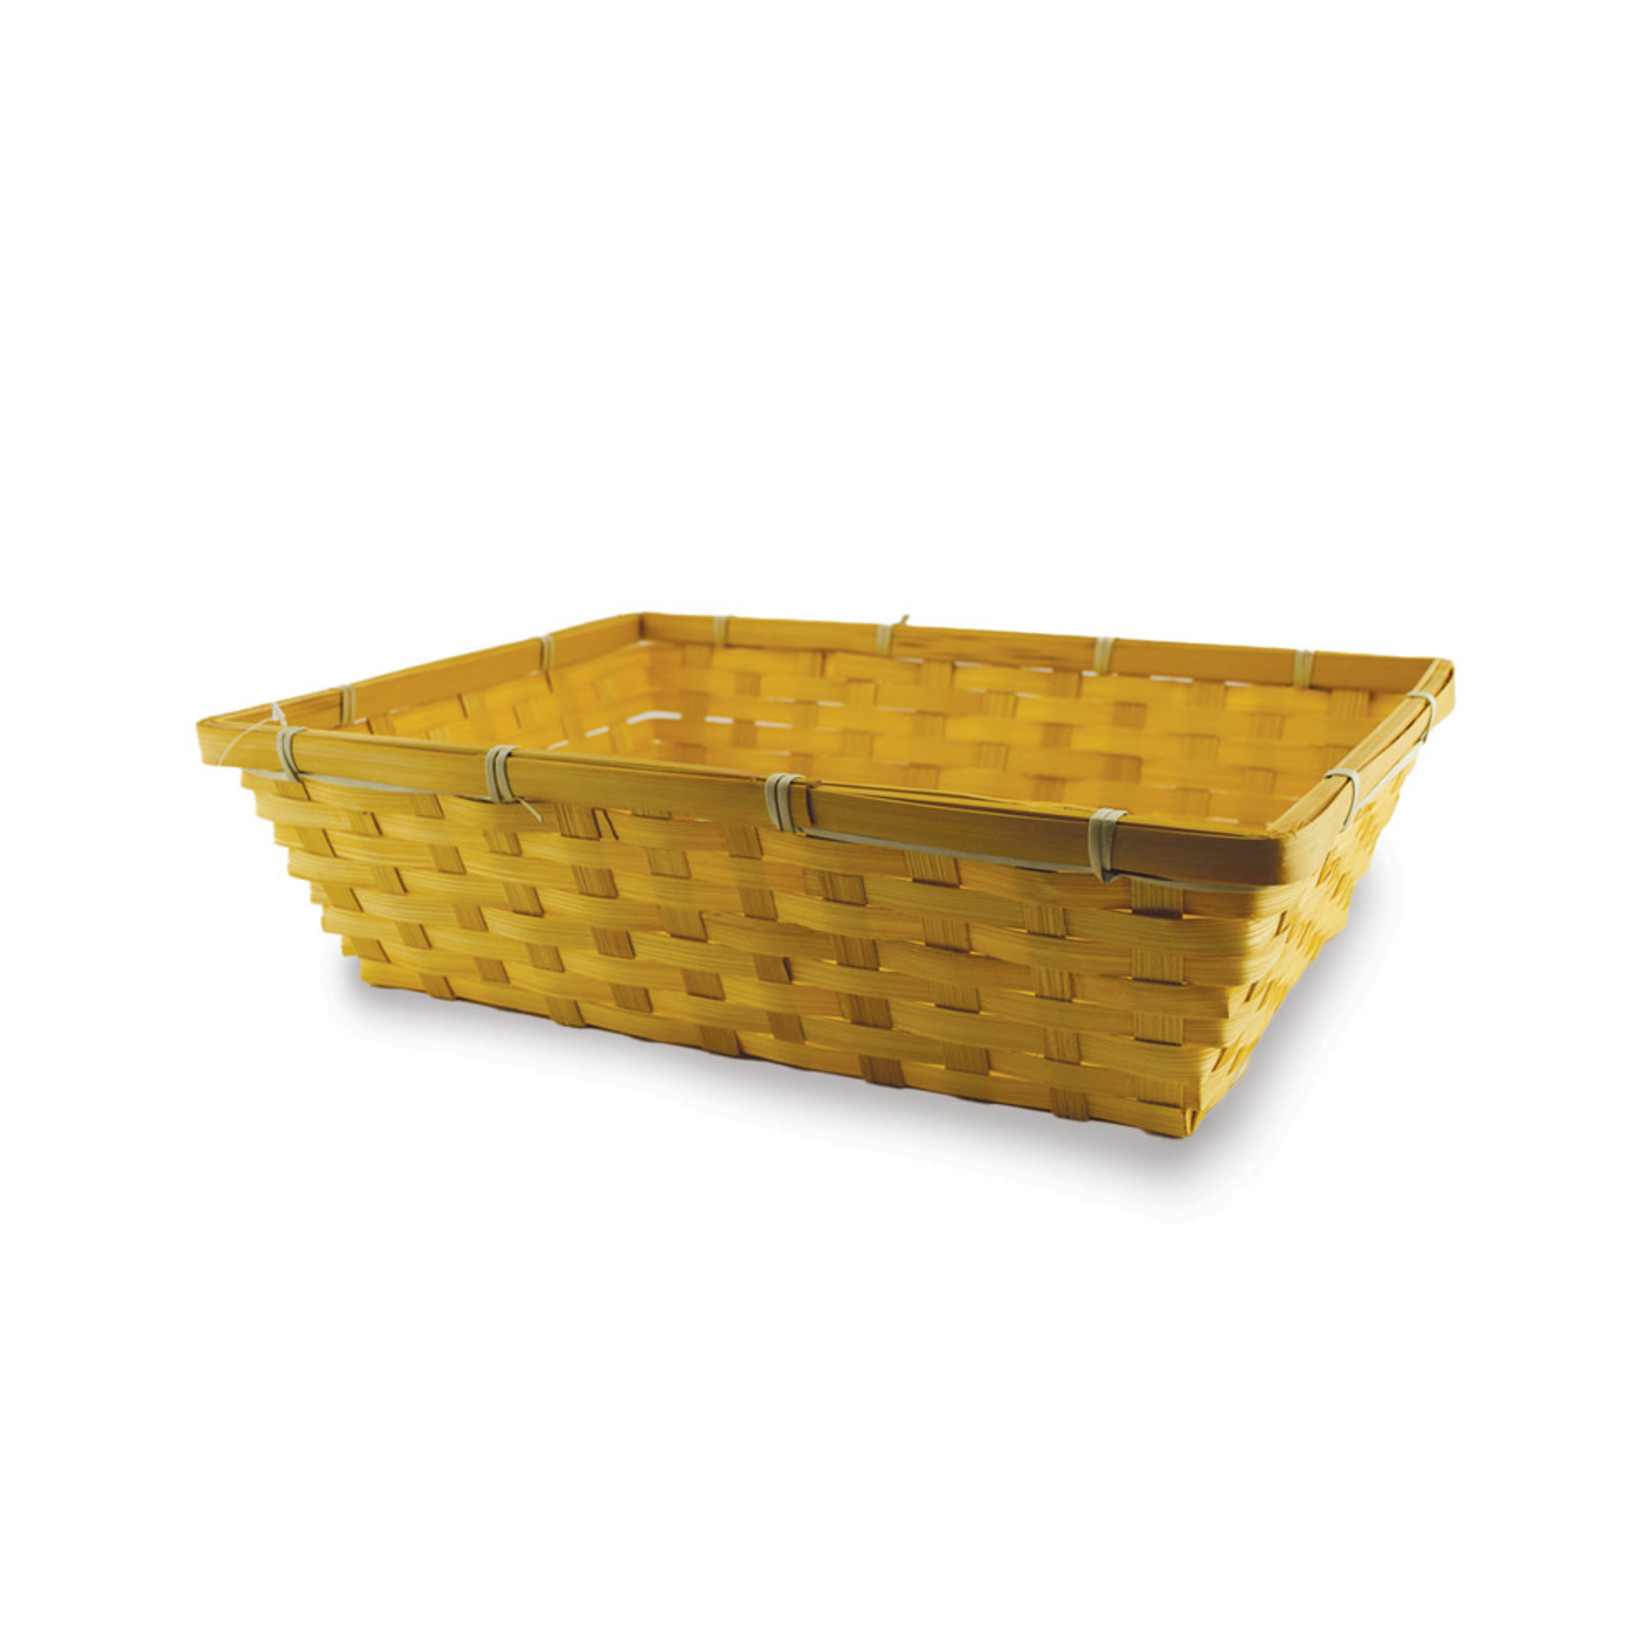 BASKET TRAY: 14.6IN X 10.6IN X 4.3IN LRG BAMBOO AUTUMN GOLD TINT